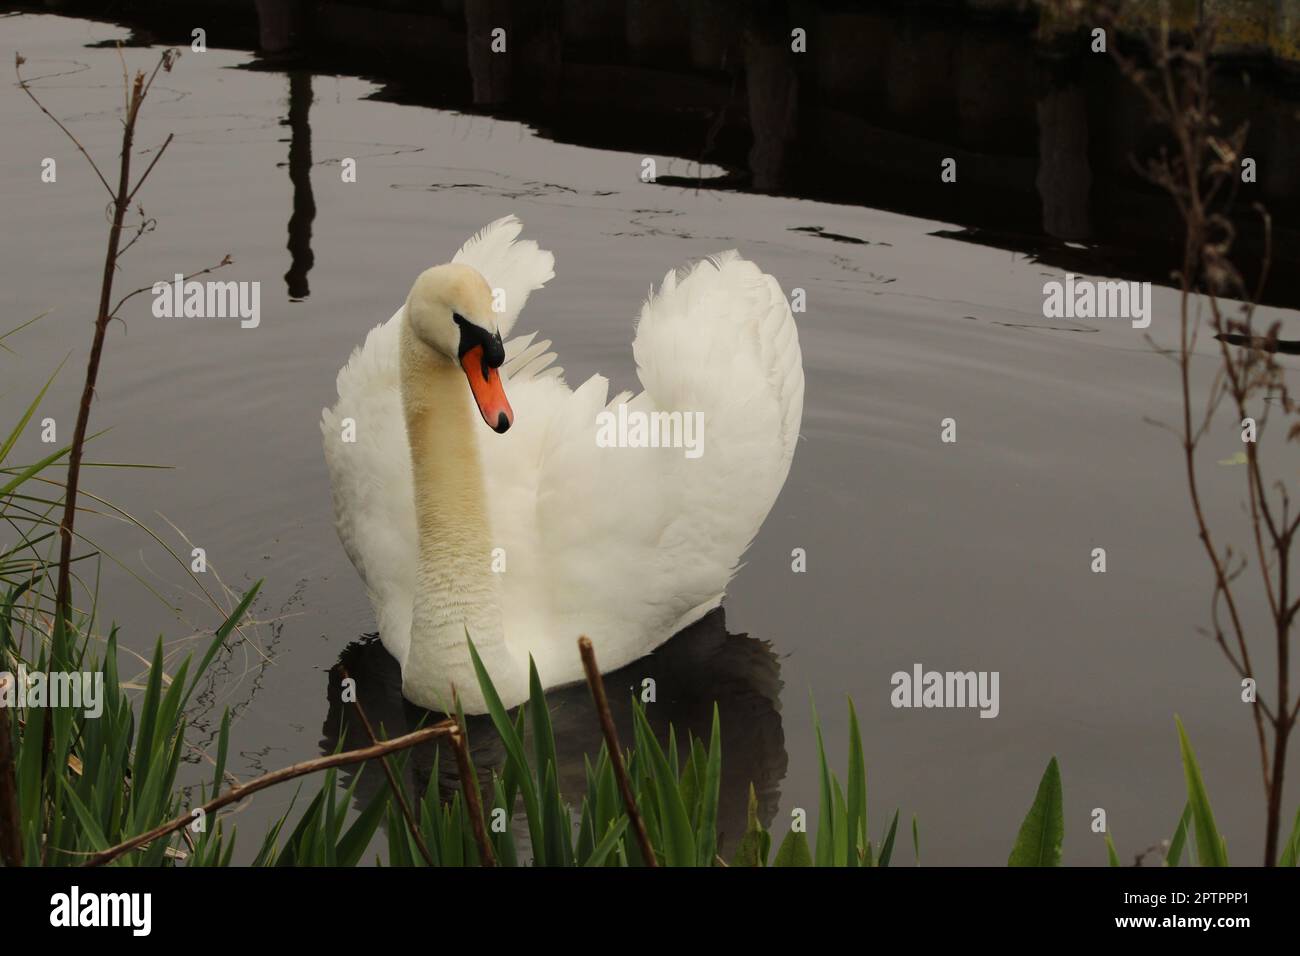 Mute swan in the water, taking a aggressive posture Stock Photo